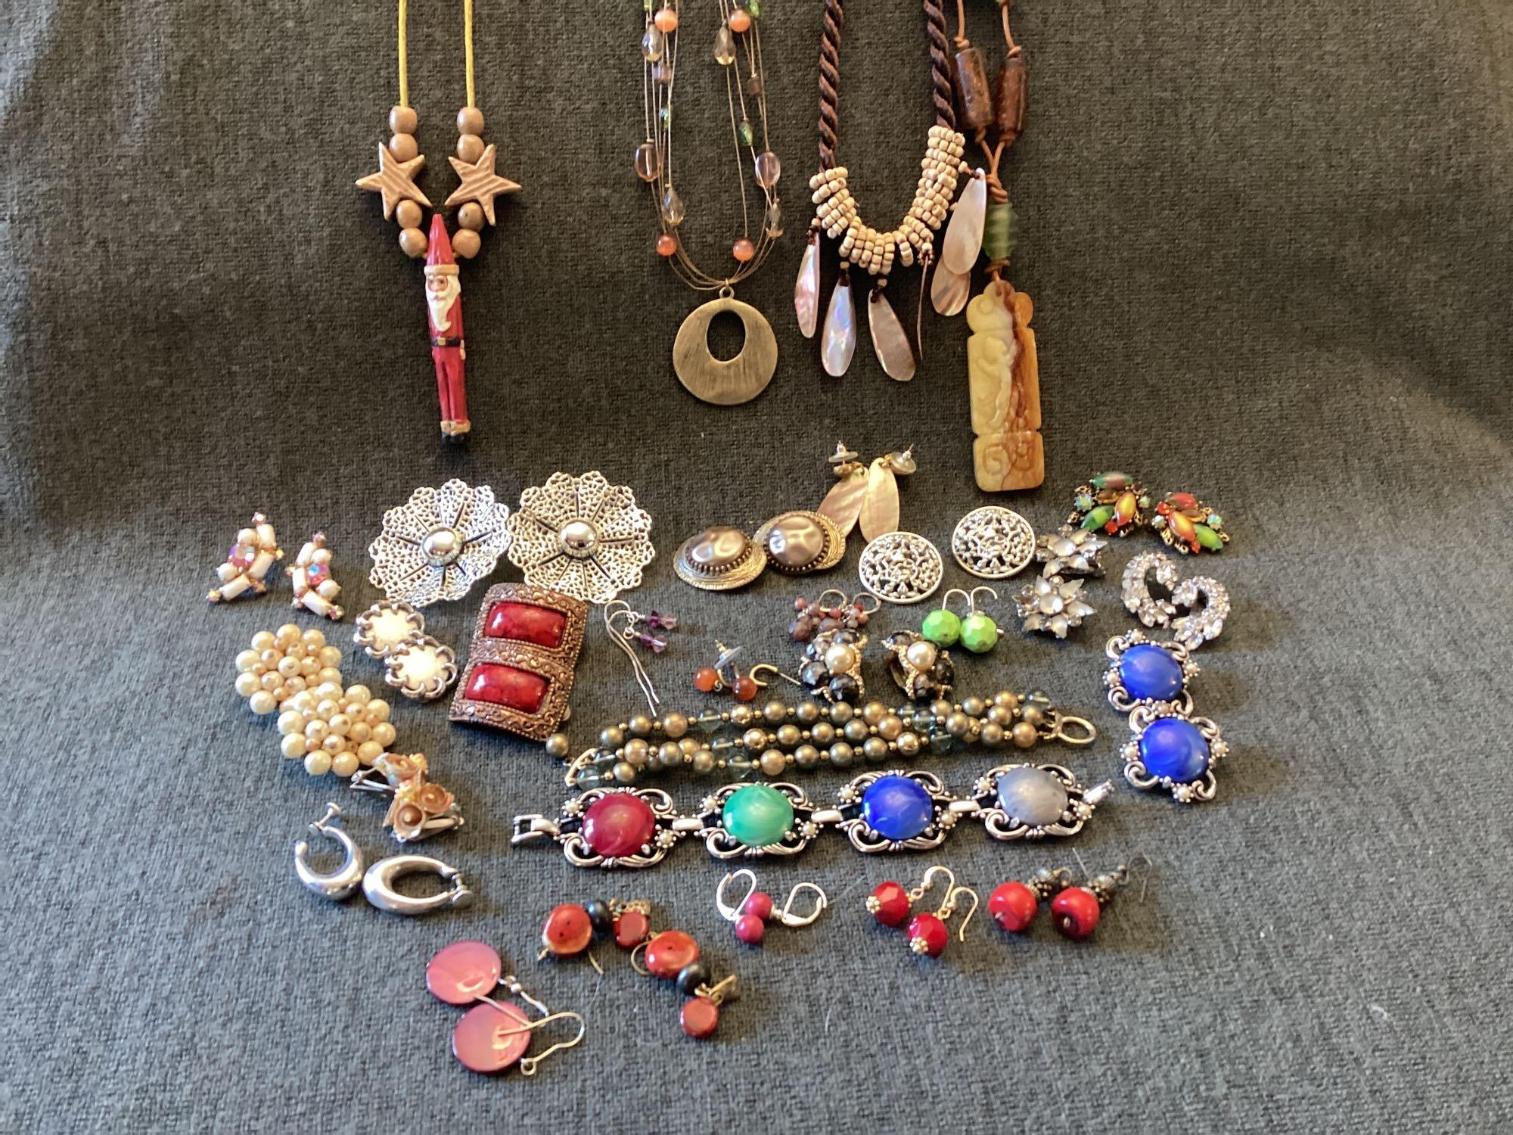 Image for Costume Jewelry